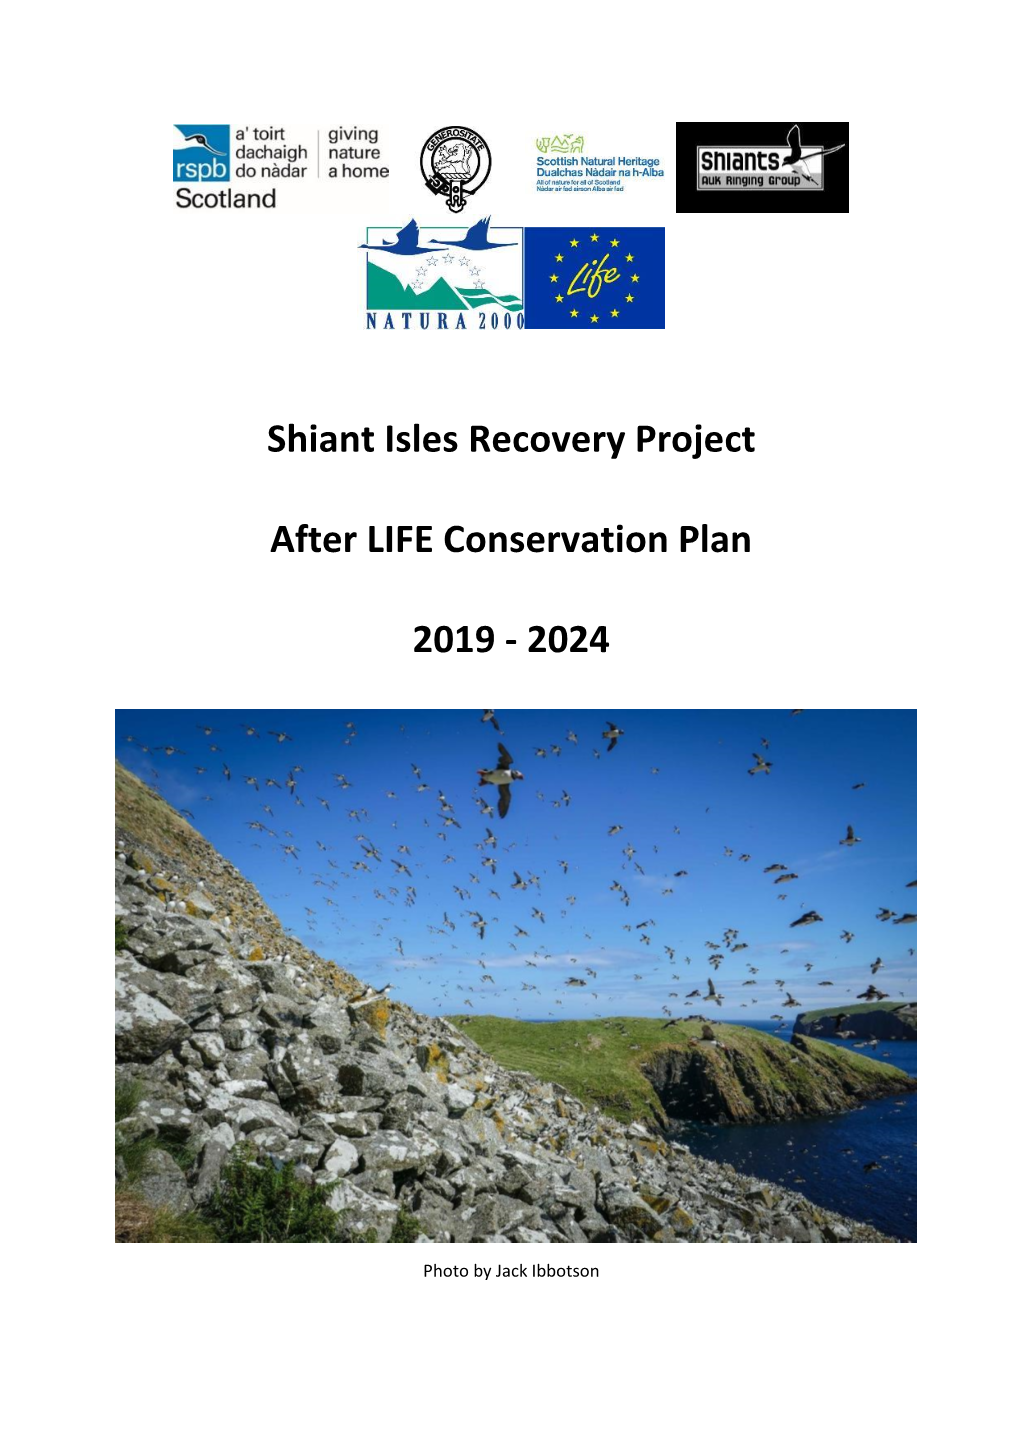 Shiant Isles Recovery Project After LIFE Conservation Plan 2019